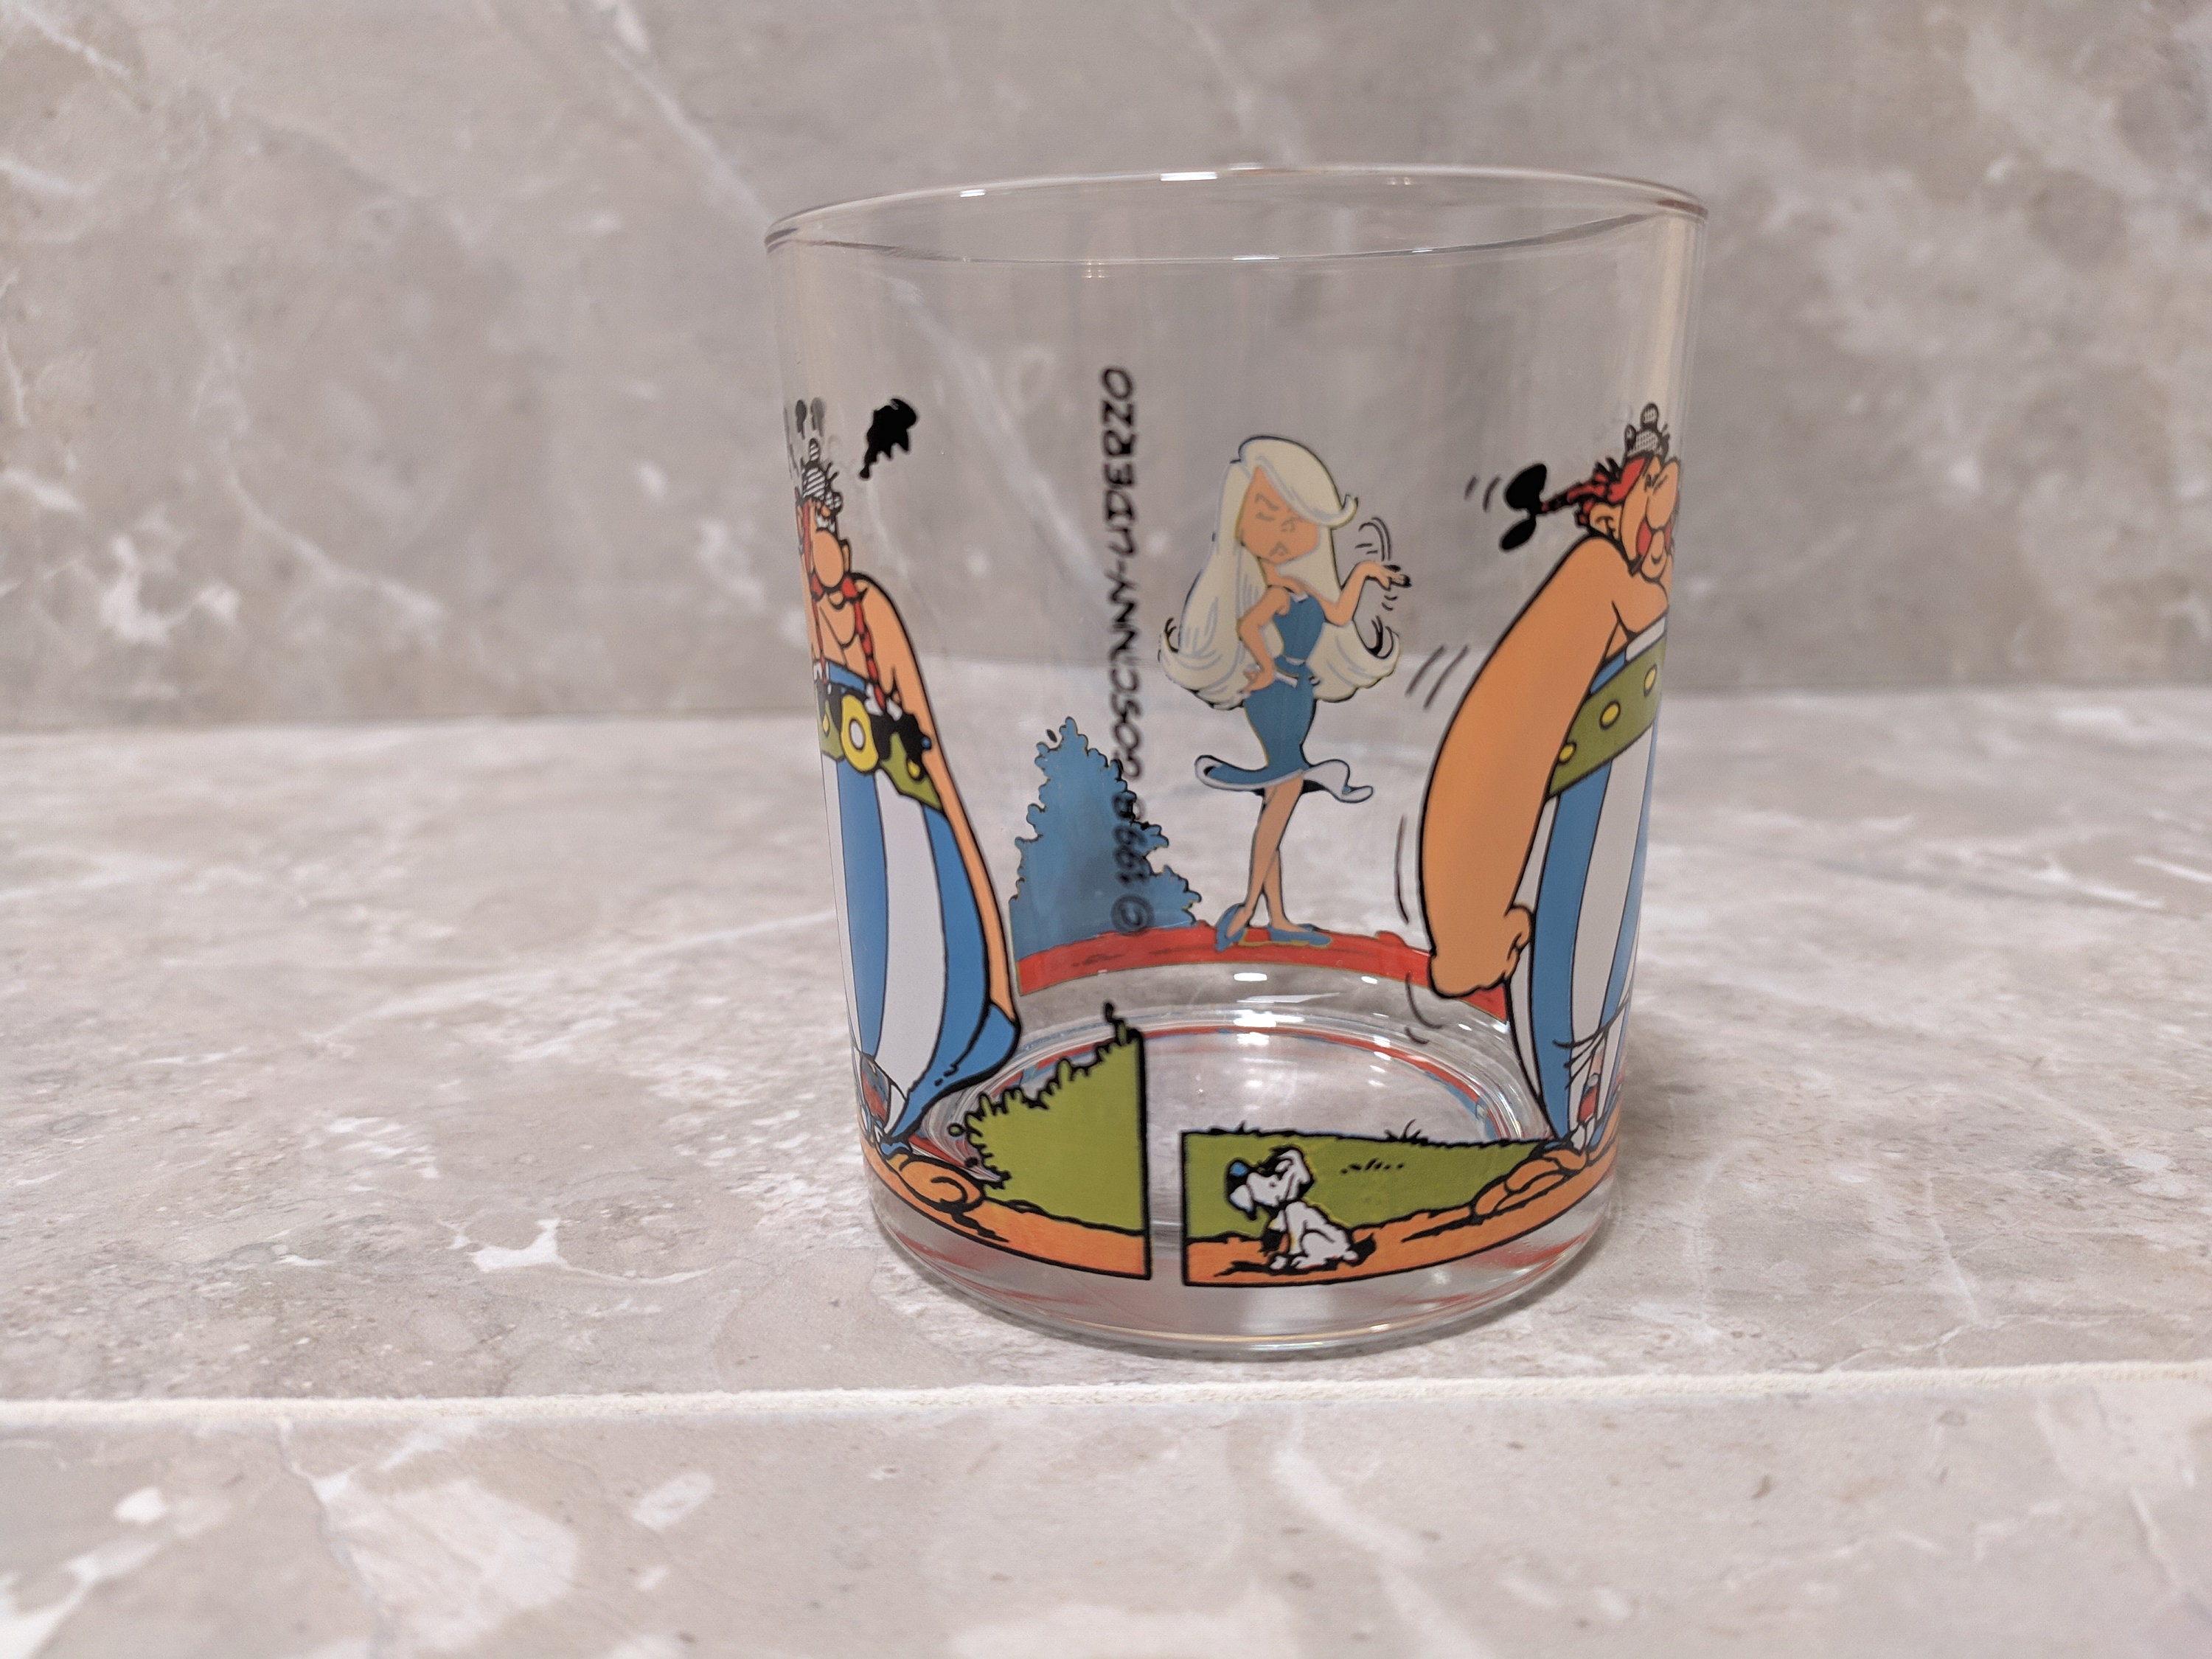 ASTERIX and Obelix RARE Nutella Collection Glasses 1998 | Etsy